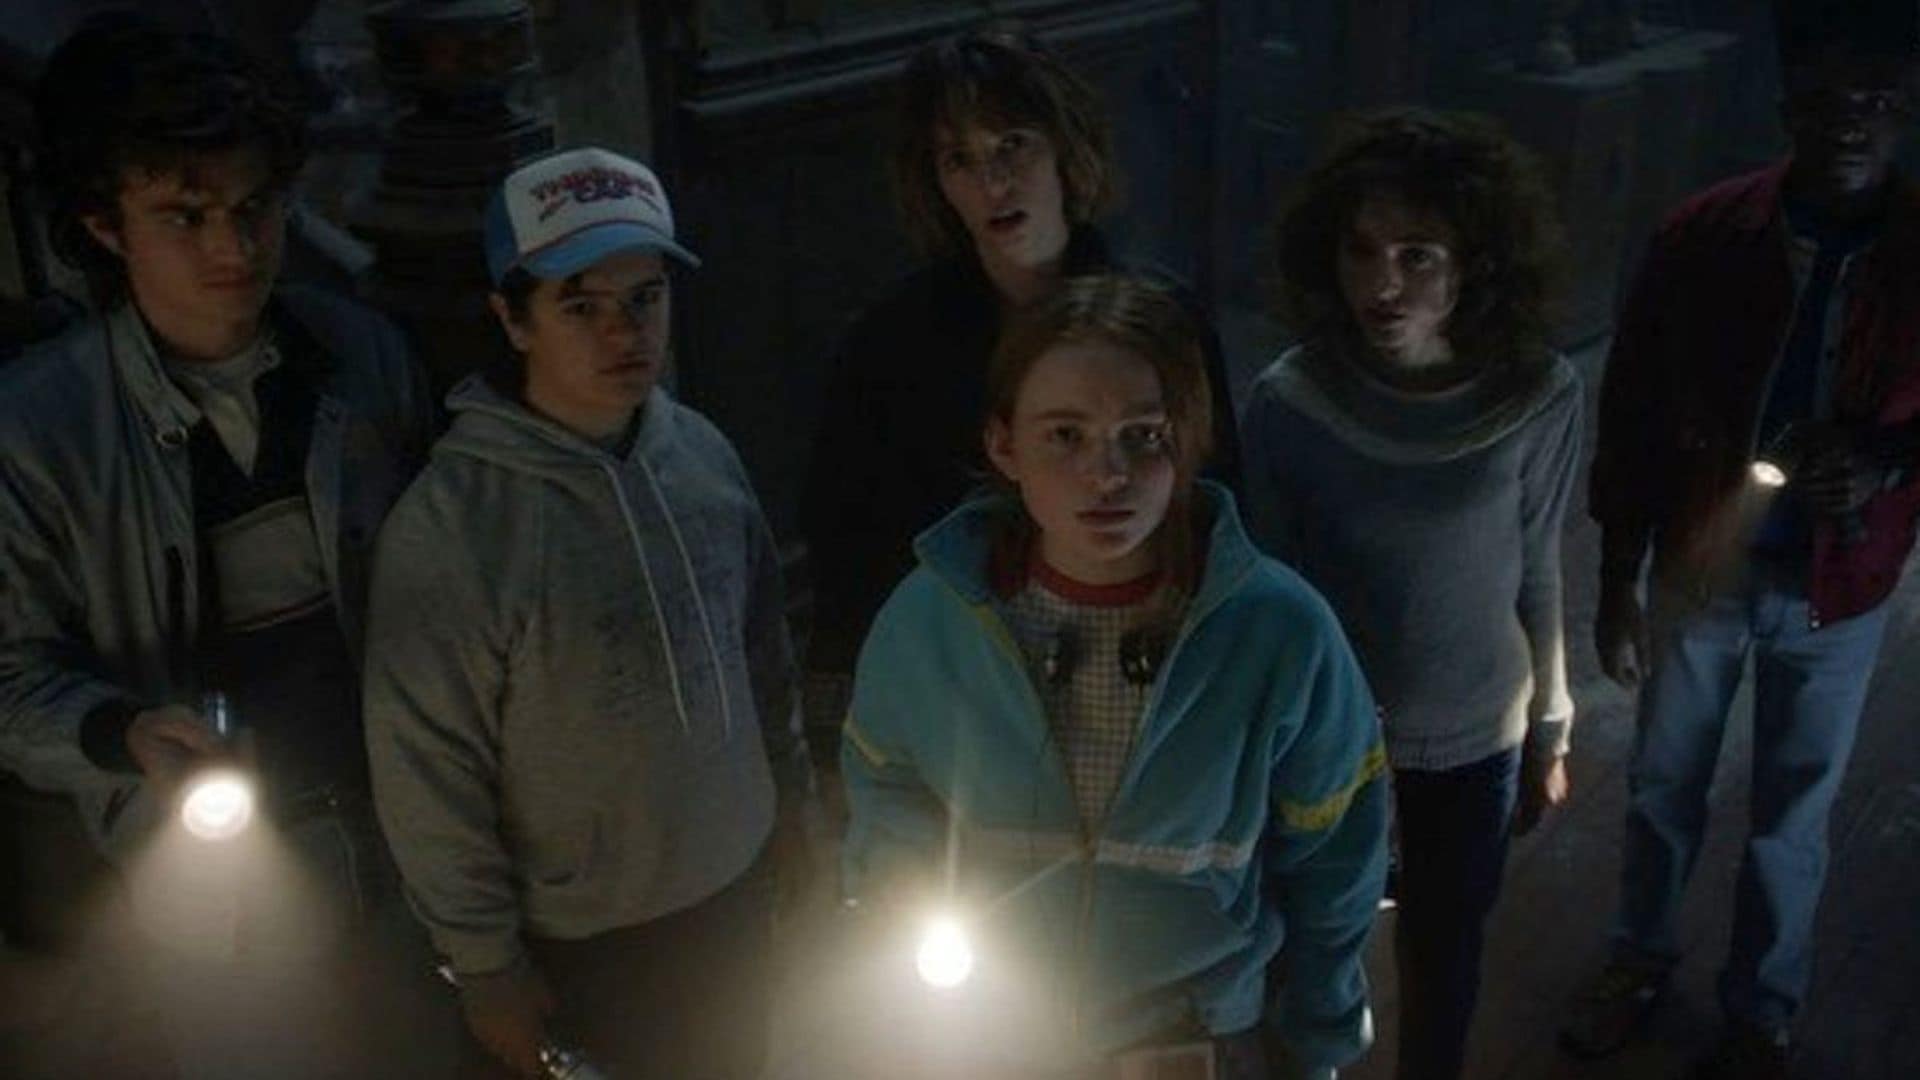 ‘Stranger Things’ to return in 2022: Watch the new teaser